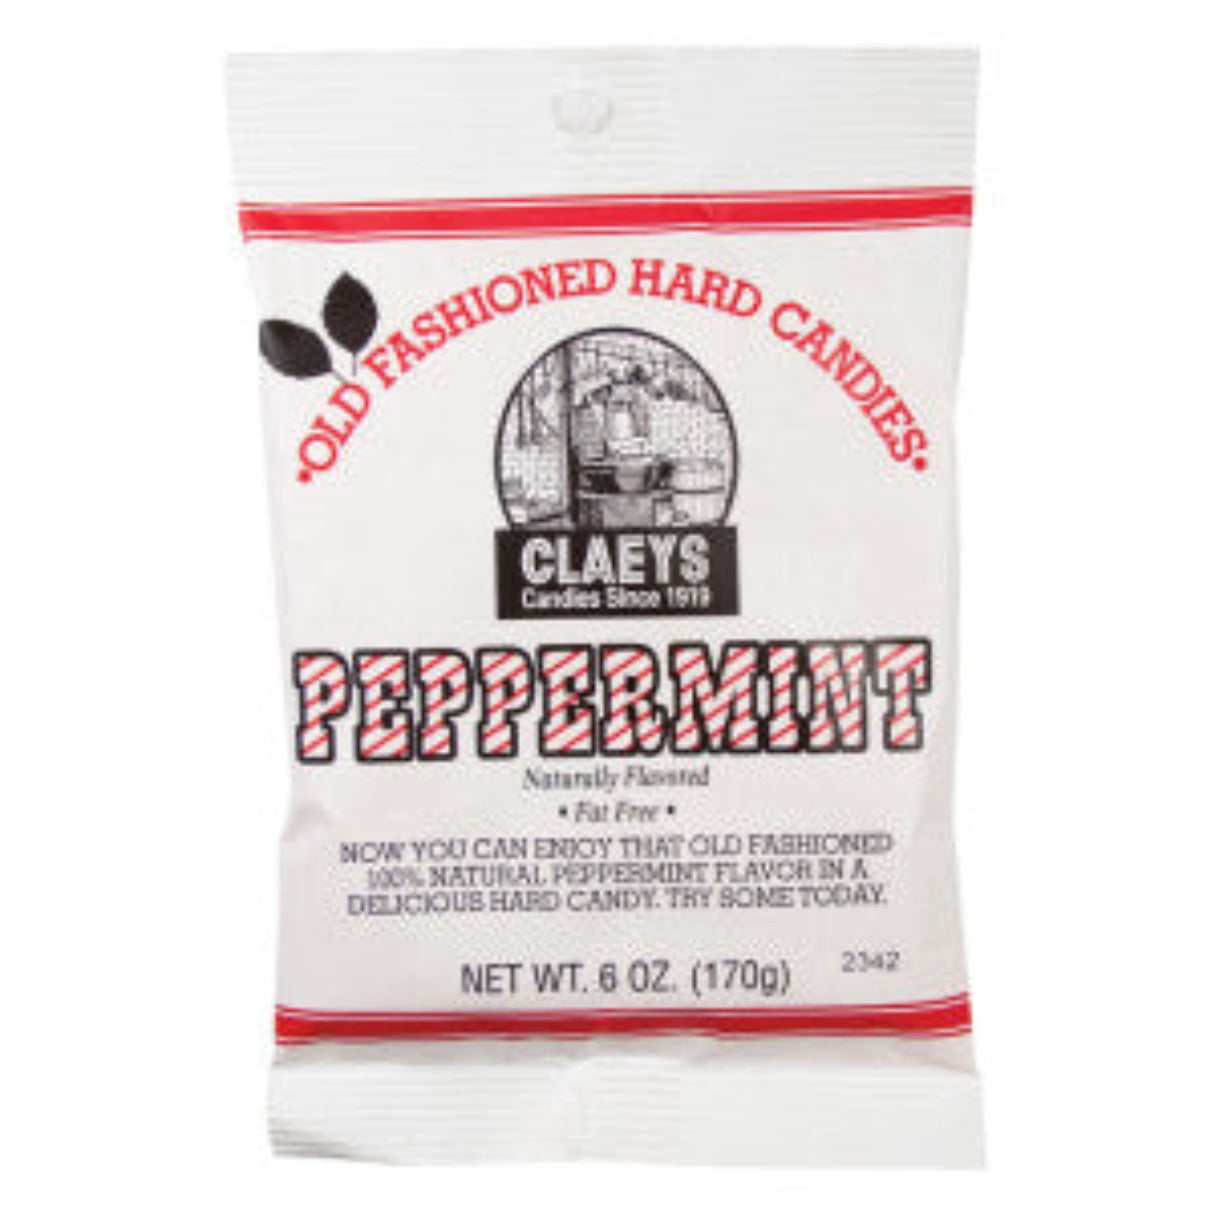 Claey's Natural Peppermint Old Fashion Hard Candies 6oz - 24ct